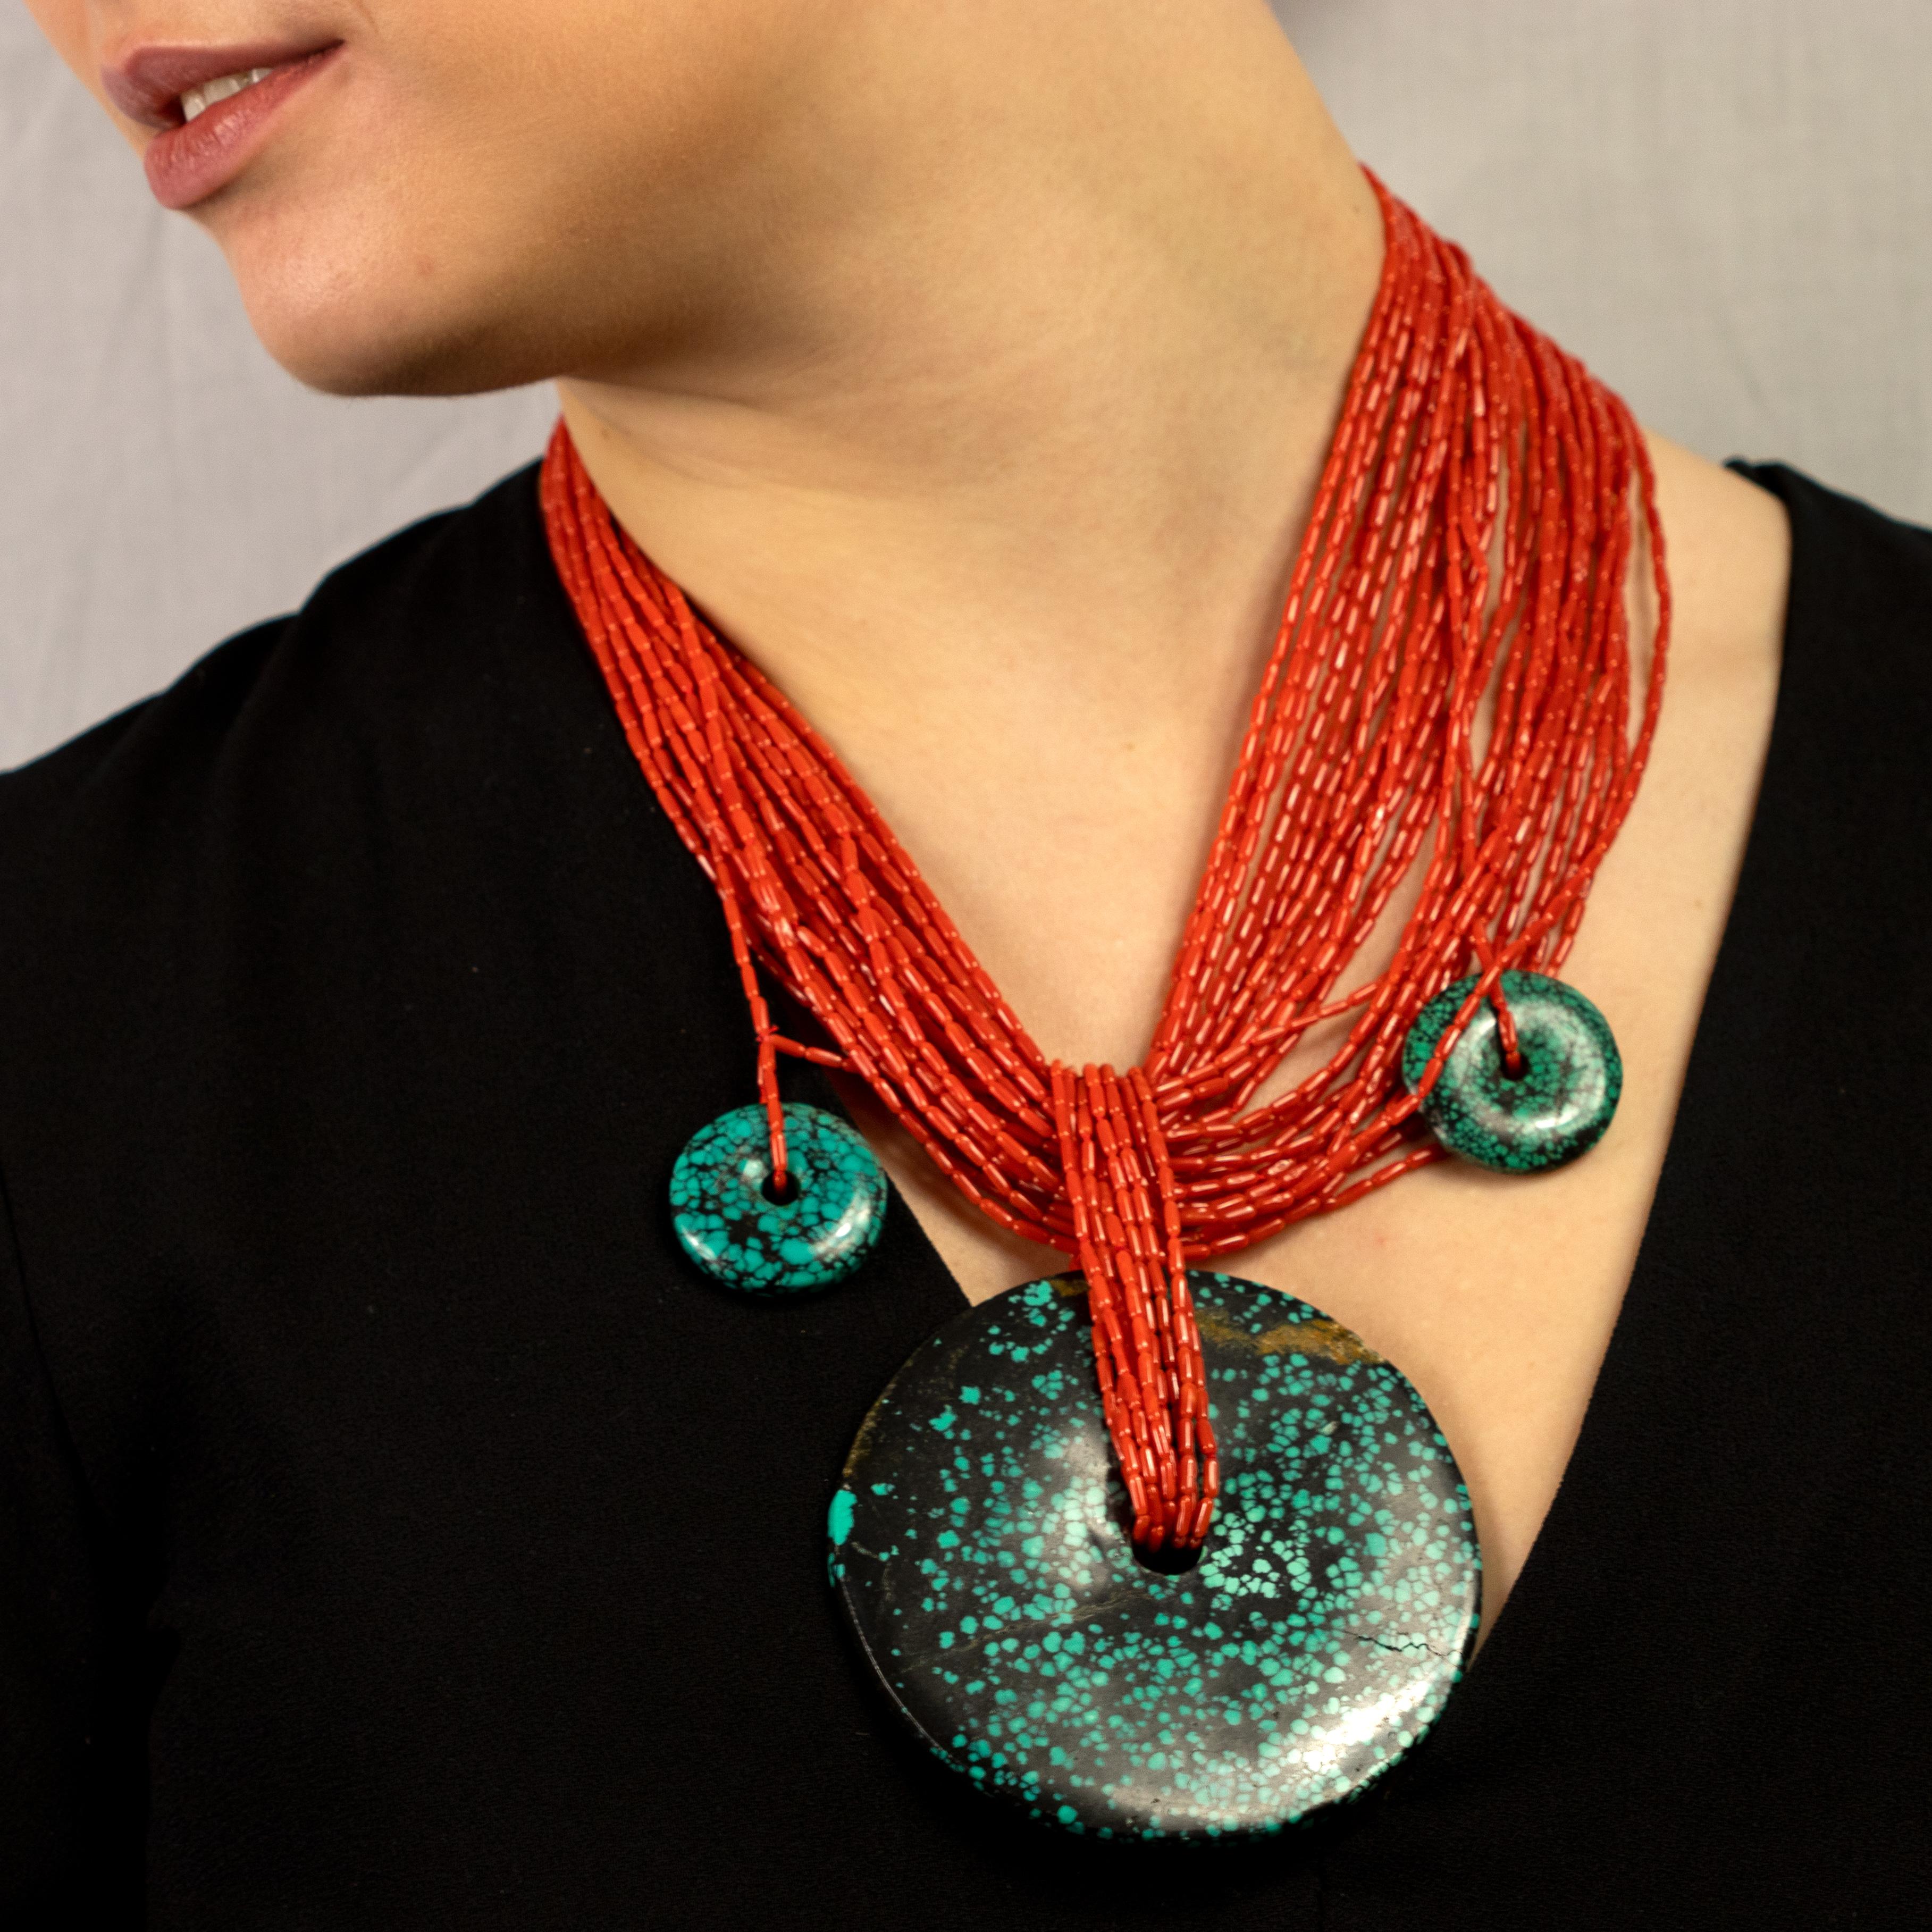 Unrepeatable necklace with red coral beads embellished by three pendant stones of natural jade. The red coral can be found in the Mediterranean sea and is the most valuable of all precious corals. 

This design is inspired by the milky way. Green